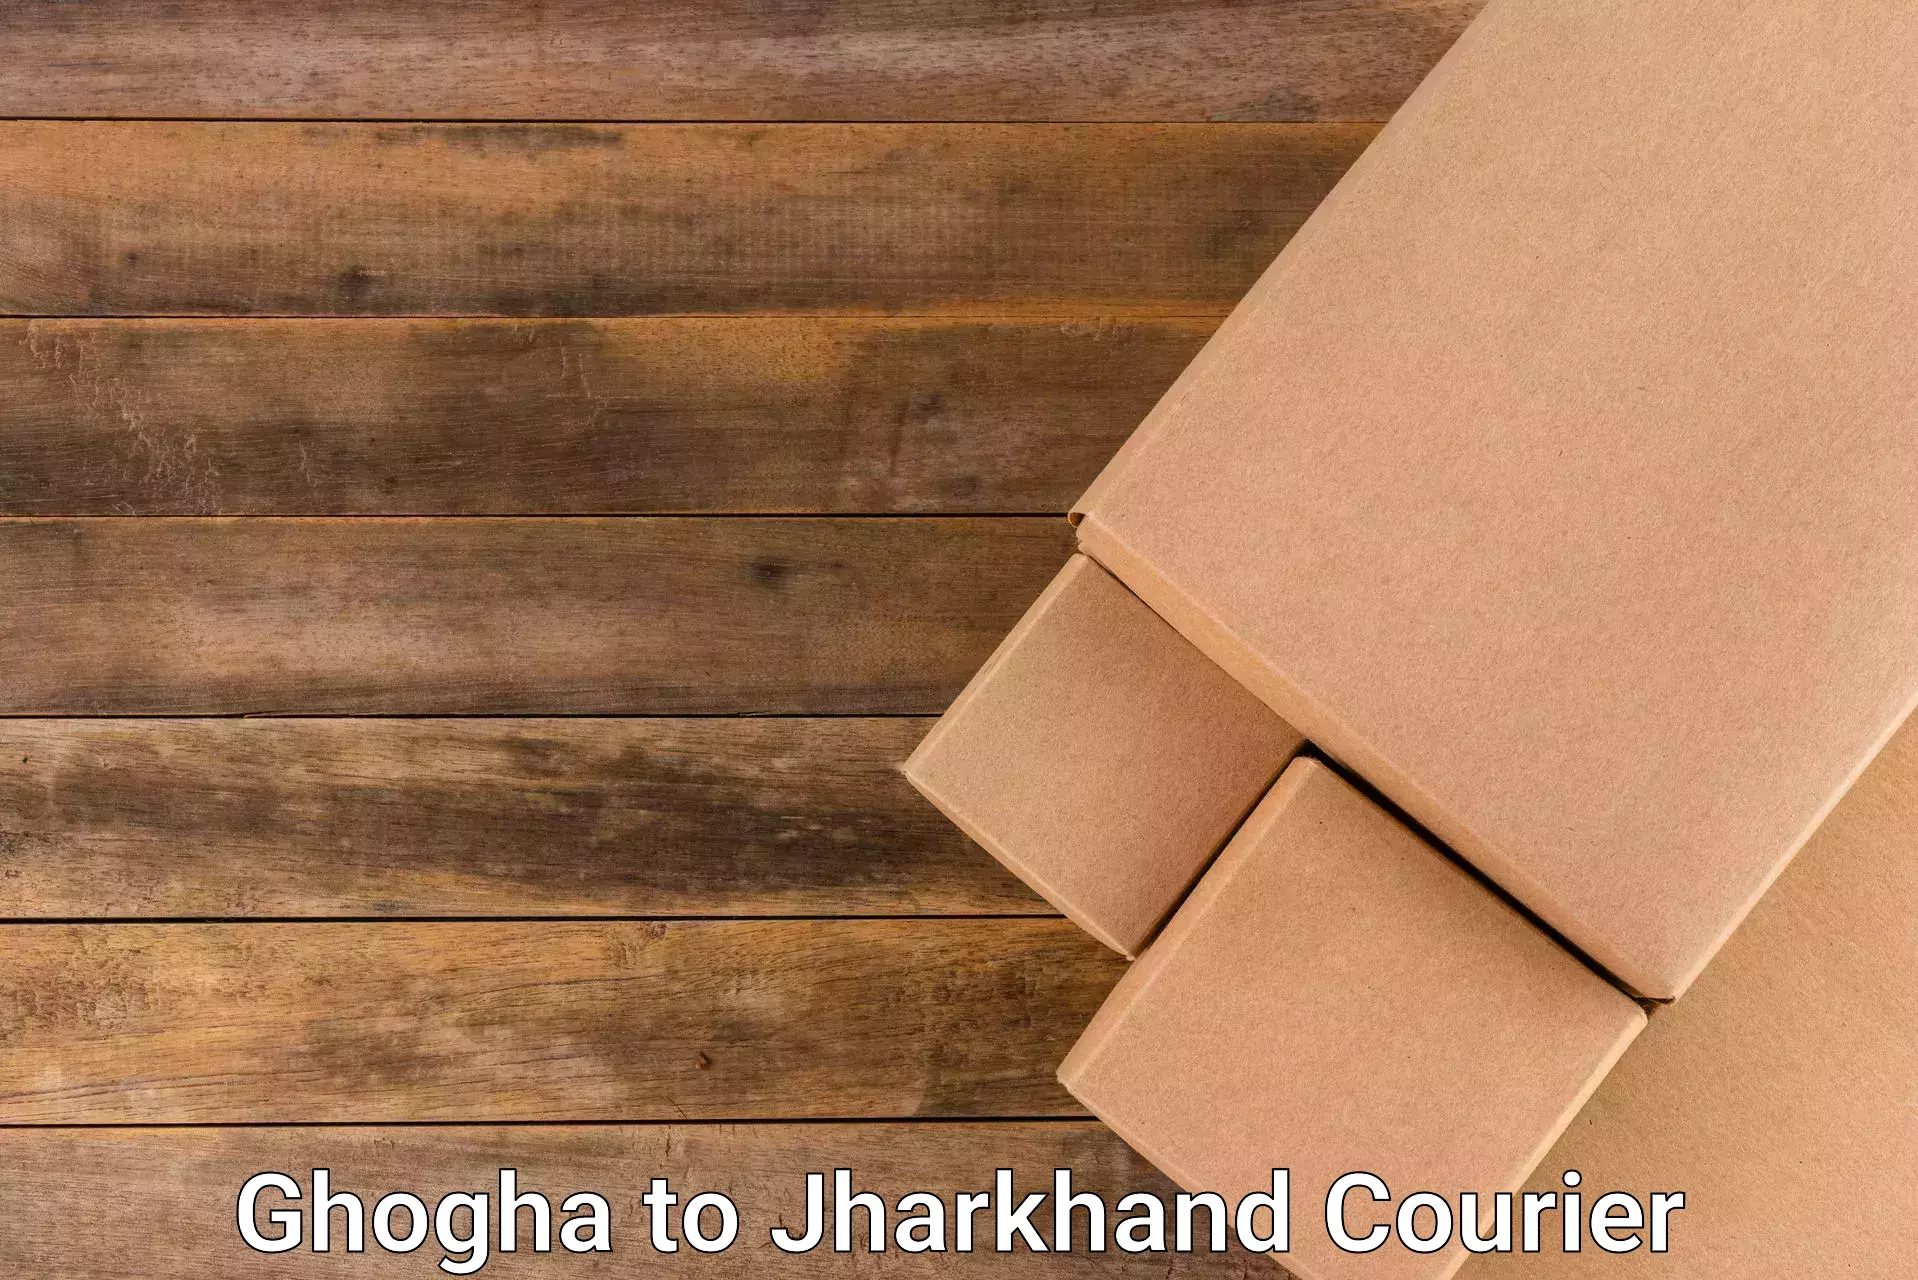 Online shipping calculator Ghogha to Jharkhand